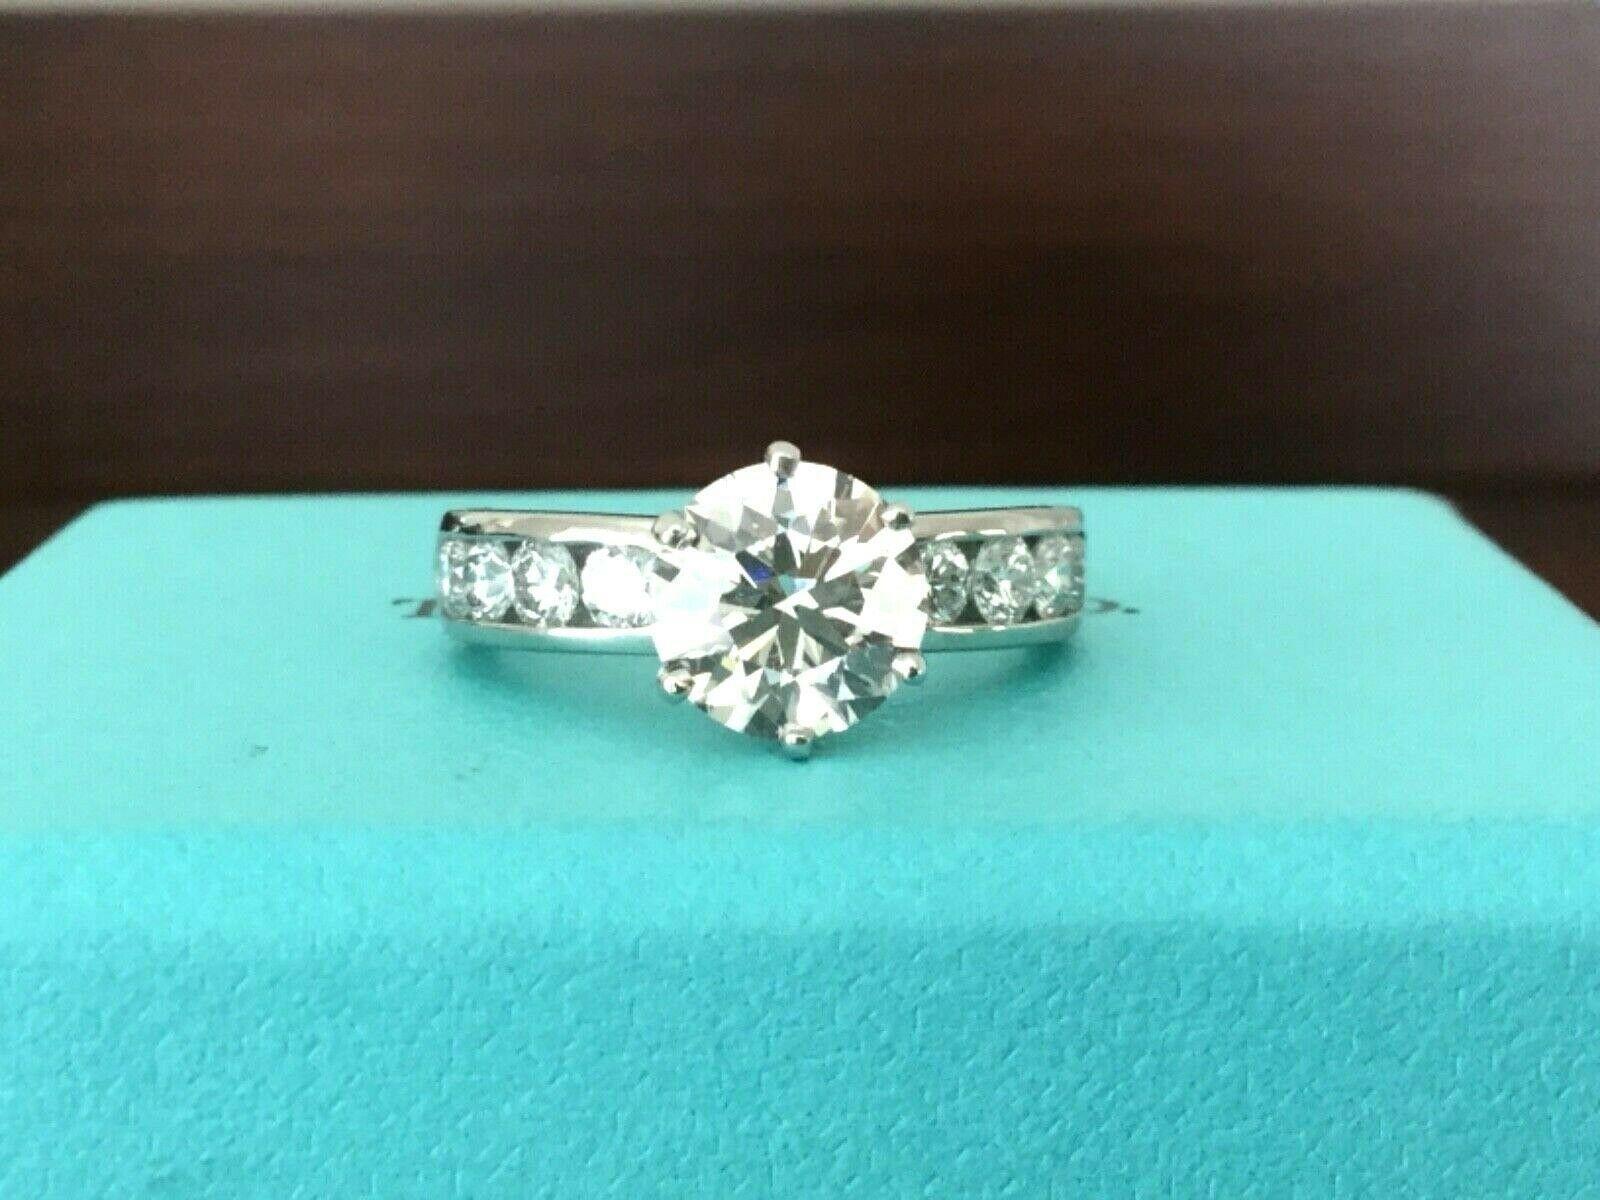 Being offered for your consideration is a like new classic Tiffany & Co Platinum and Diamond 1.47 carat natural Round engagement ring set in the classic channel set diamond band (TOTAL CARAT WEIGHT IS 1.77 carats)..  This ring was hardly worn and